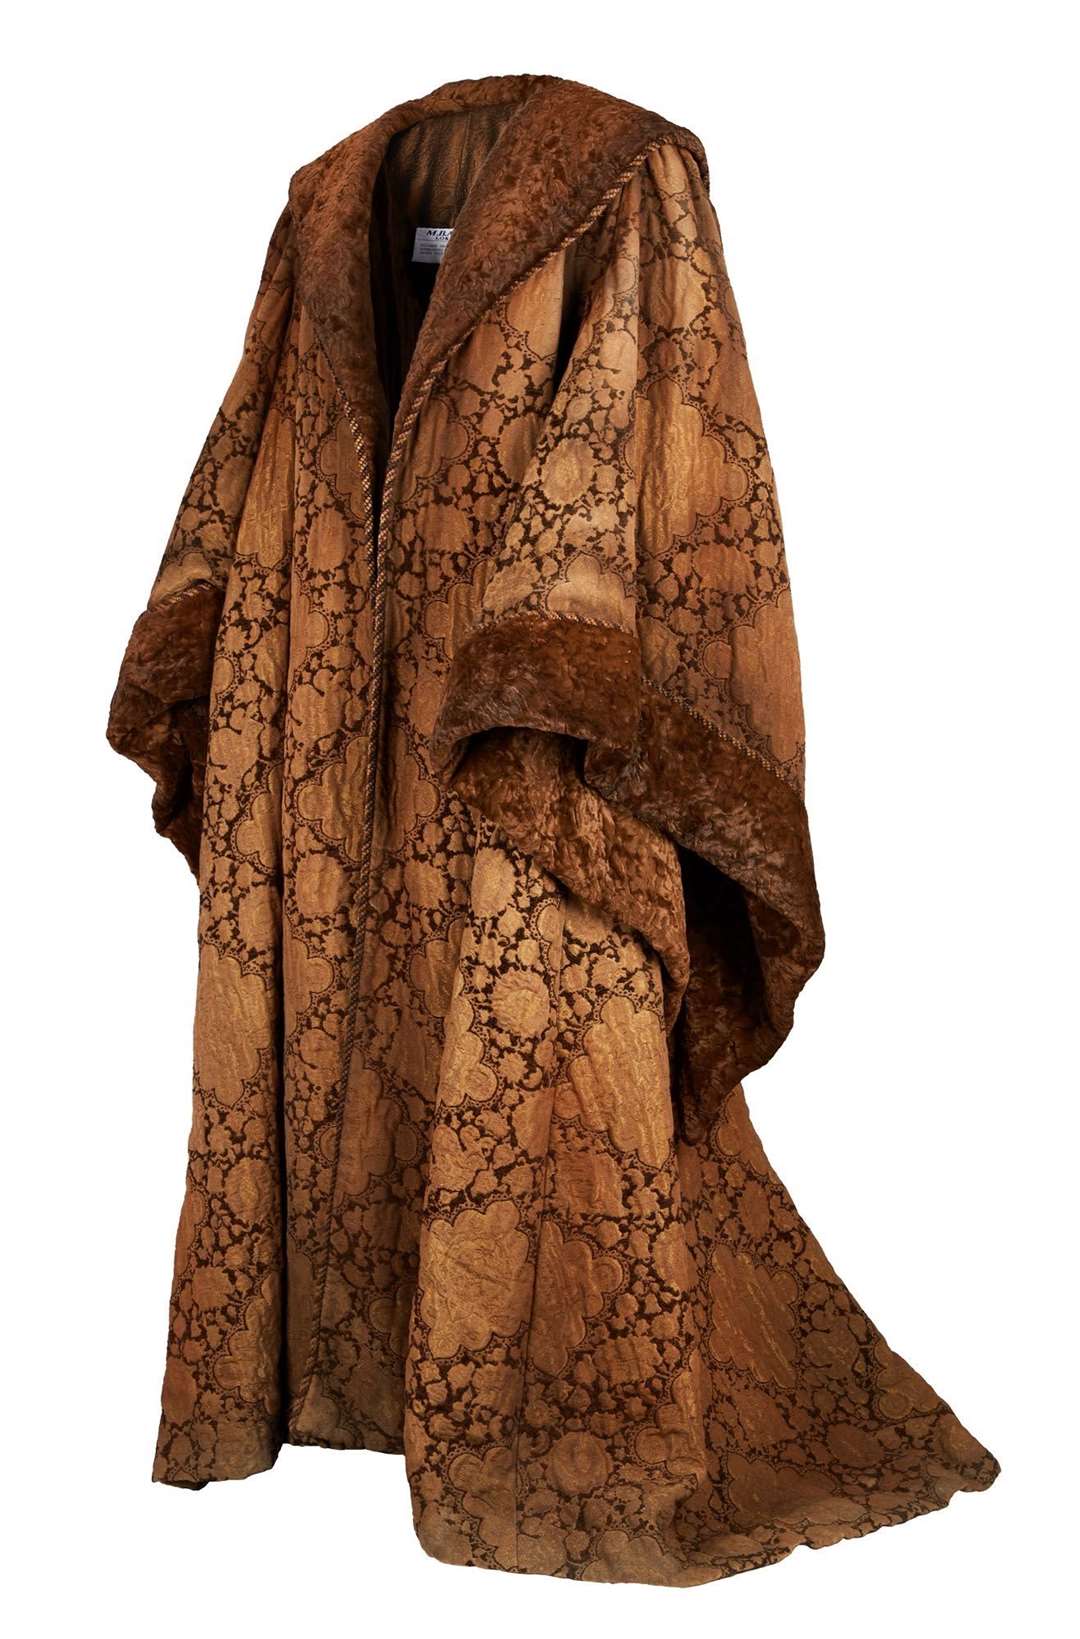 A special robe worn by Albus Dumbledore (Julien’s Auctions/PA)